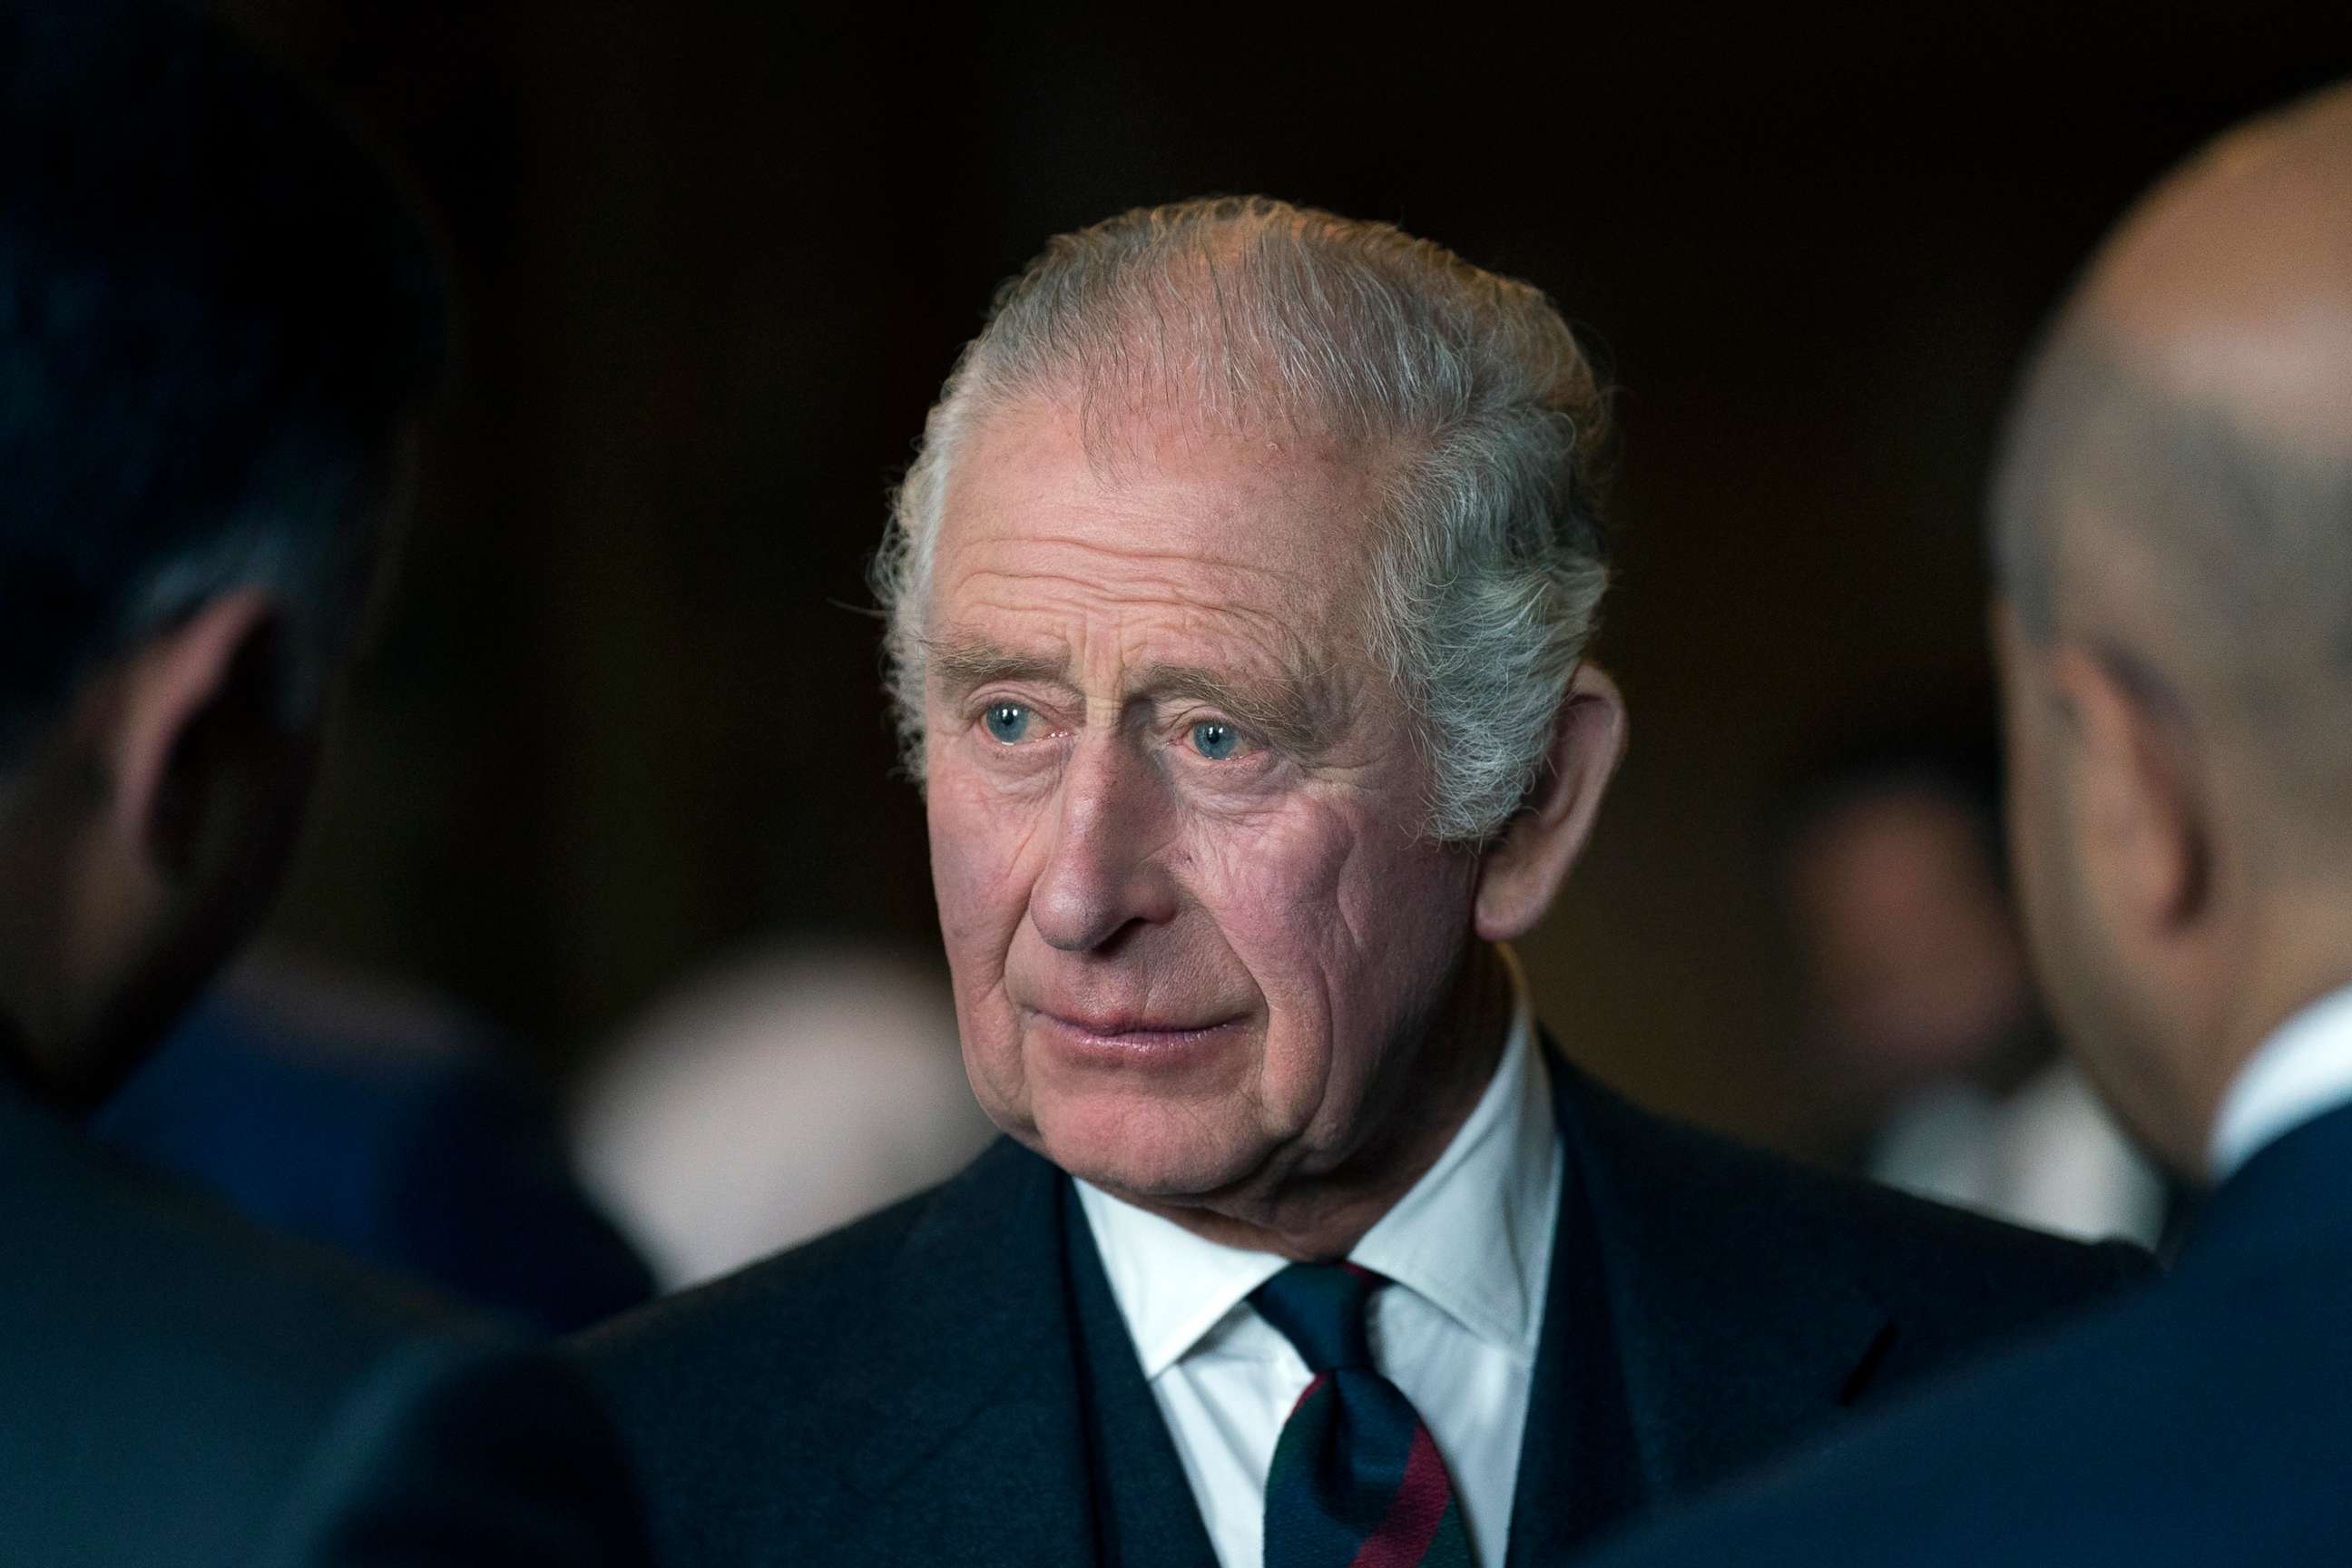 PHOTO: King Charles III hosts a reception to celebrate British South Asian communities, in the Great Gallery at the Palace of Holyroodhouse on Oct. 3, 2022 in Dunfermline, Scotland.